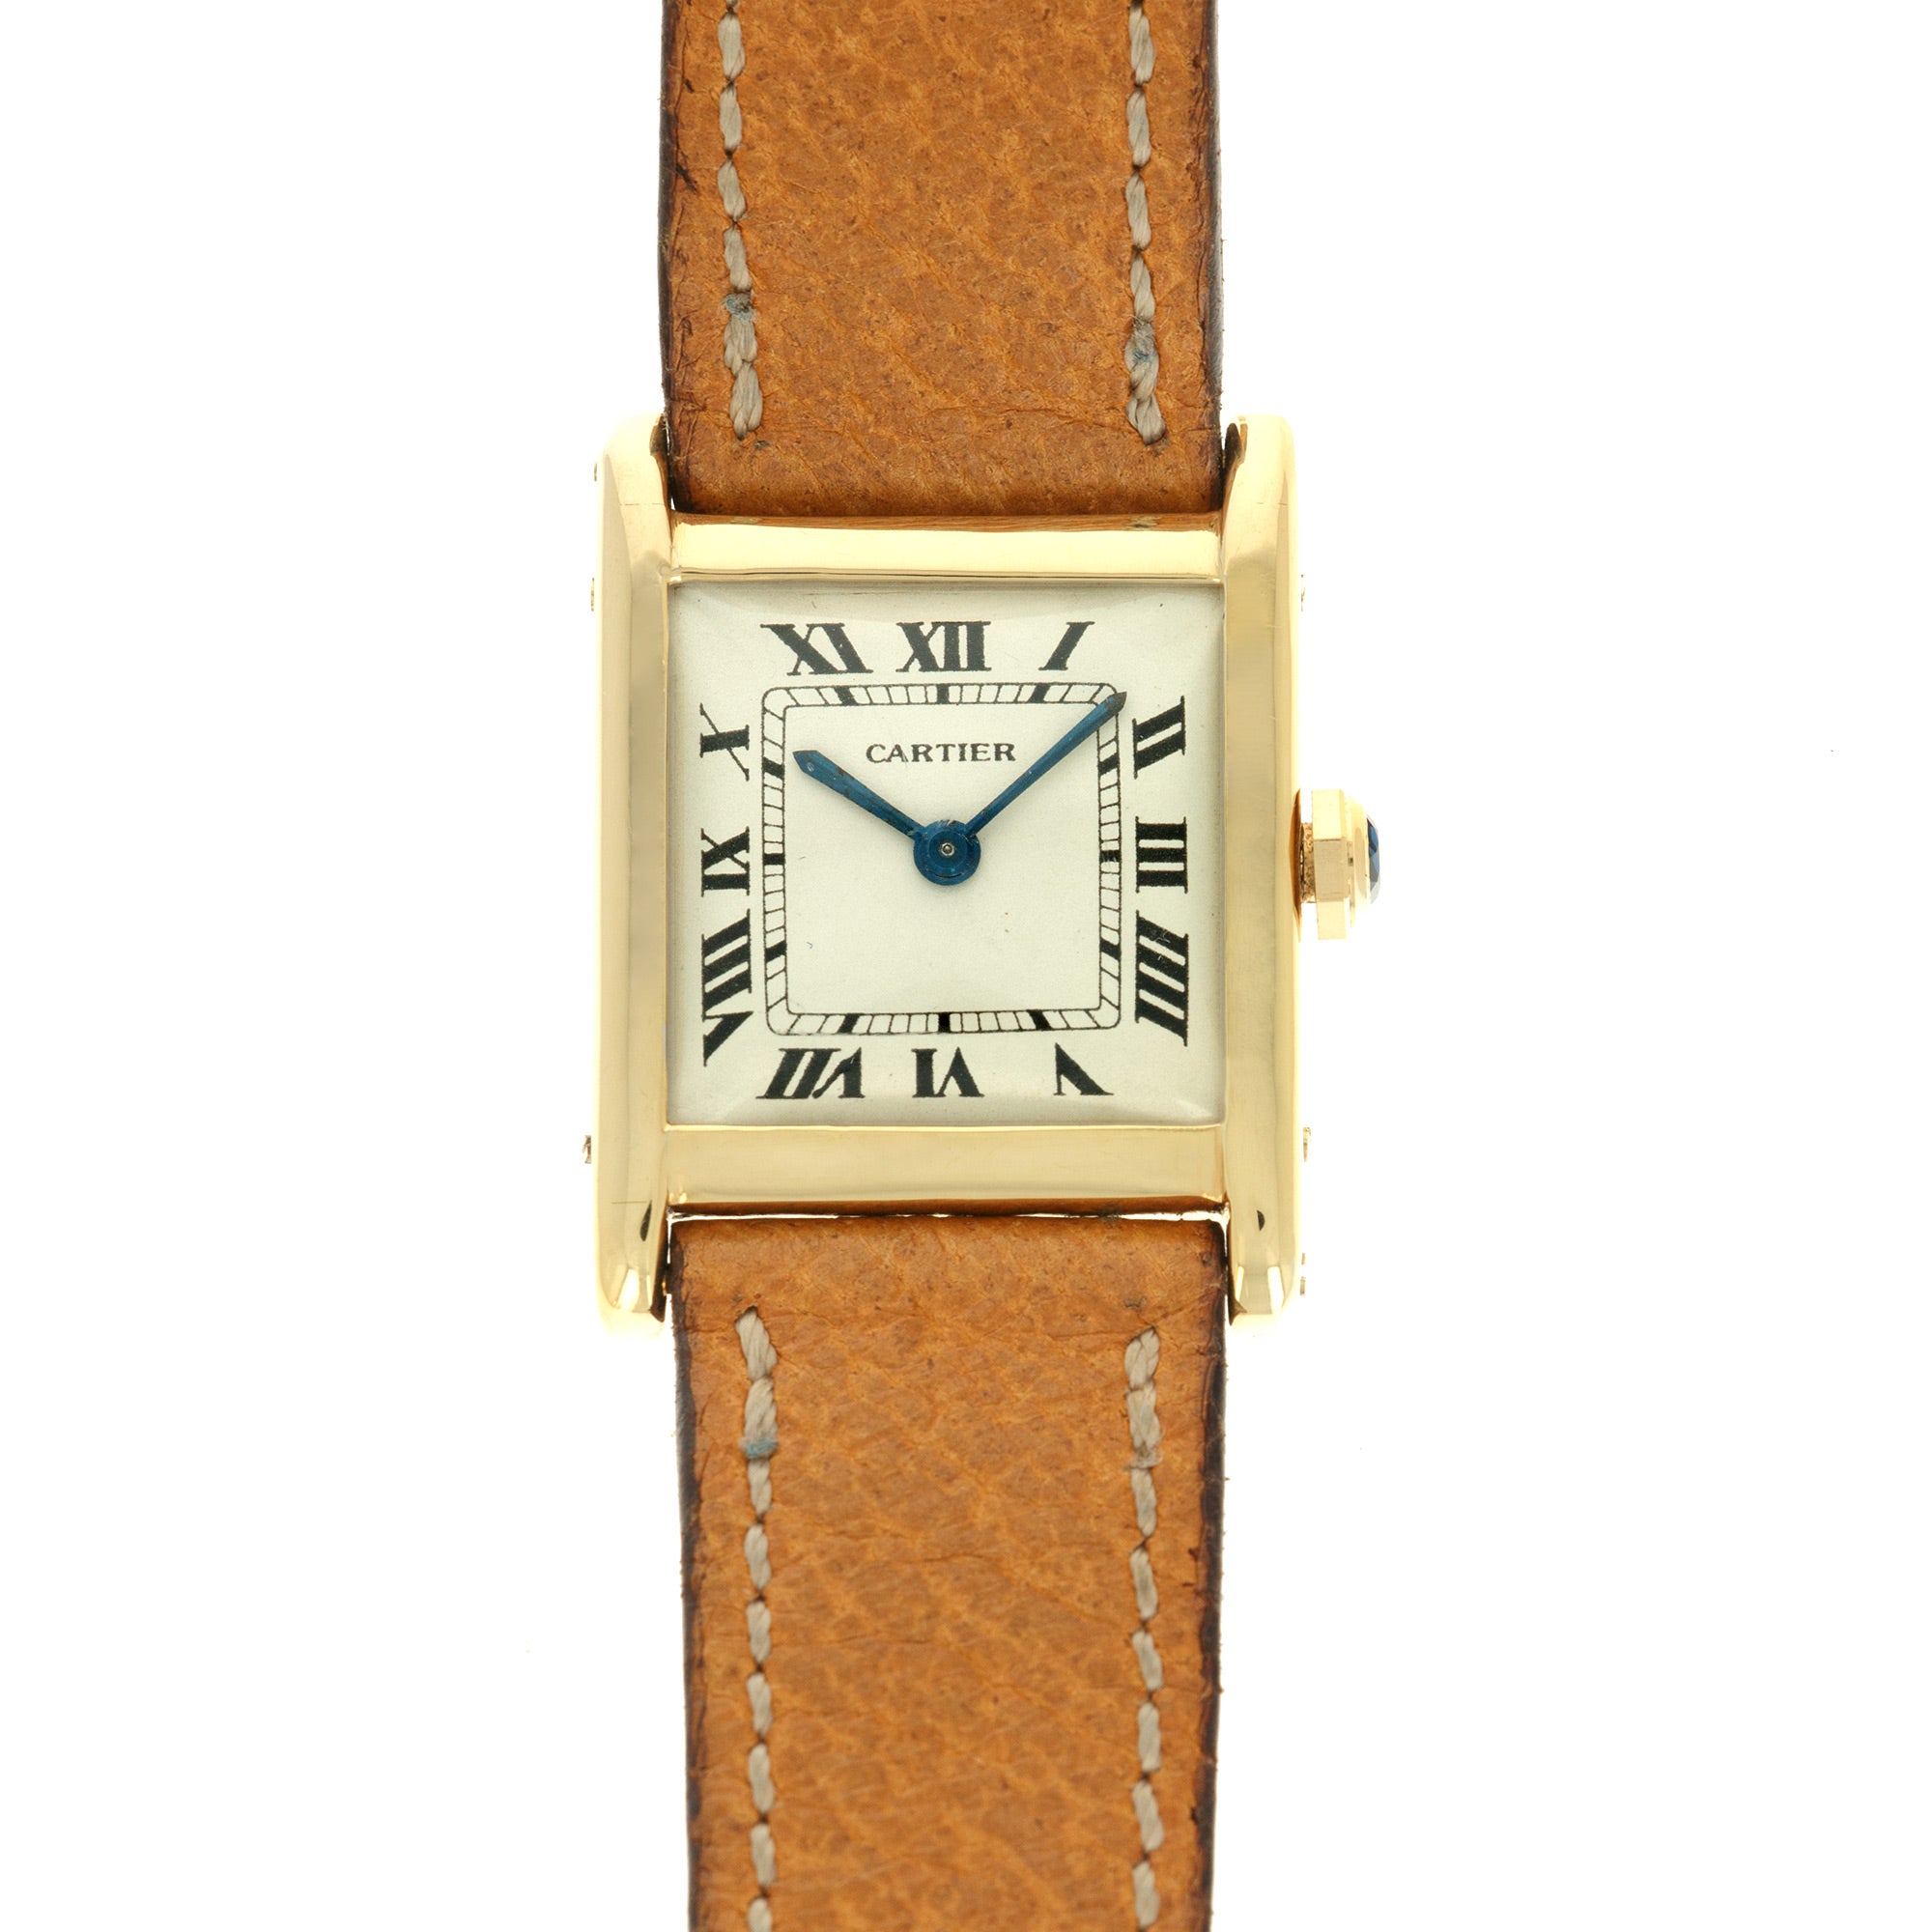 Cartier - Cartier Yellow Gold Large Tank Speciale Watch, 1959 - The Keystone Watches